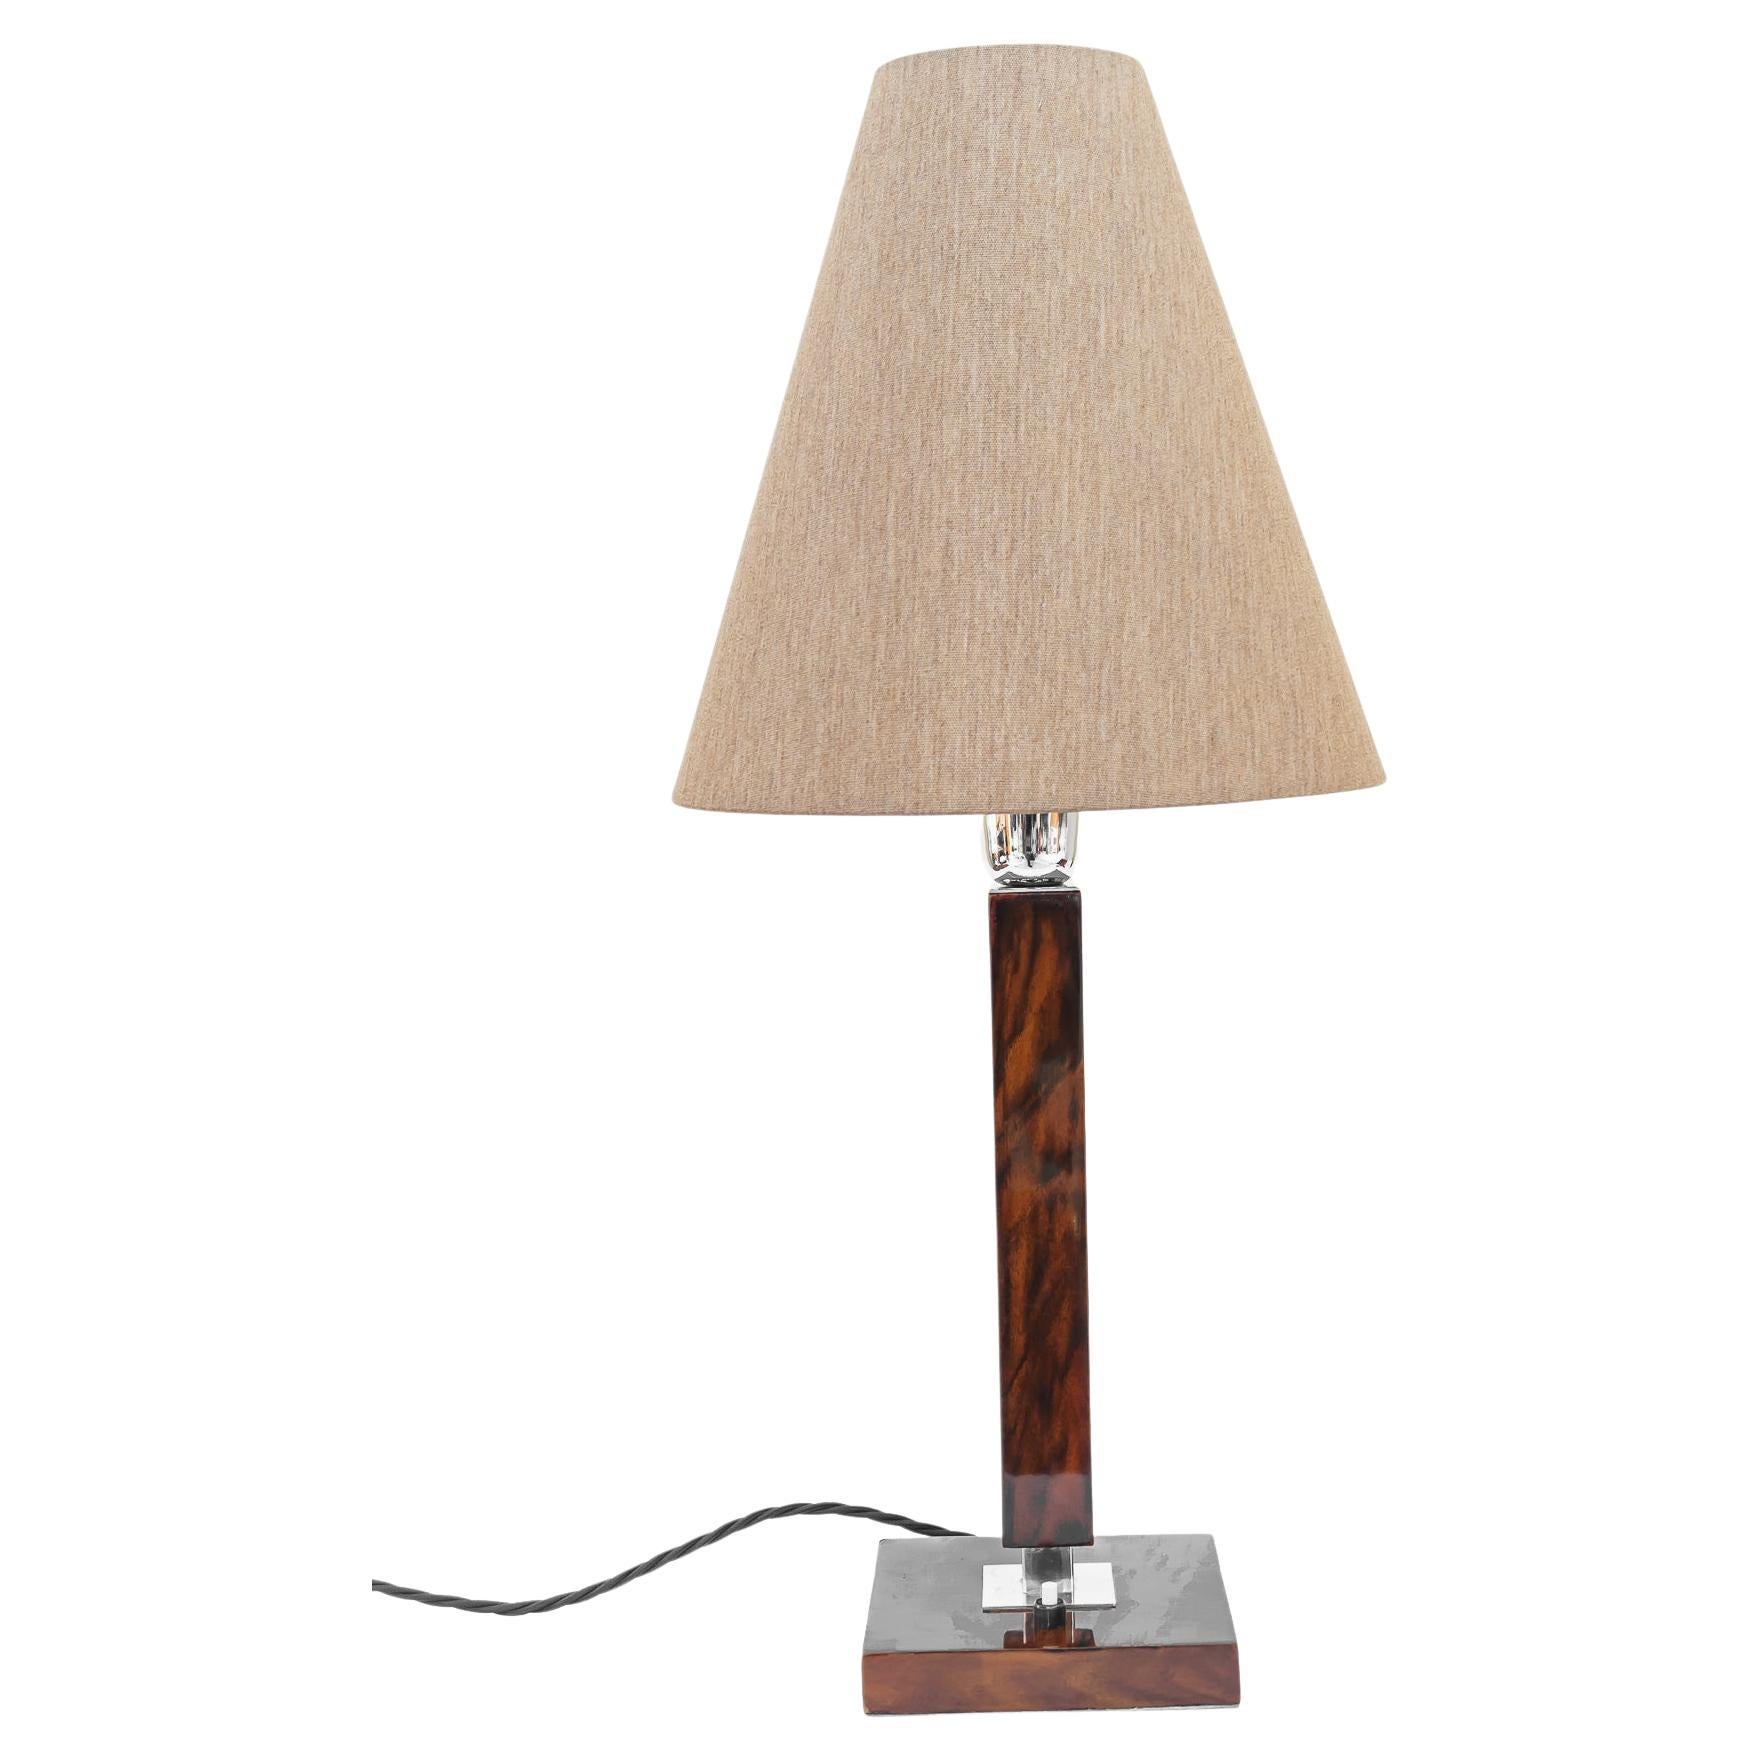 Art Deco Table Lamp Vienna Around 1920 Nut Wood and Fabric Shade For Sale